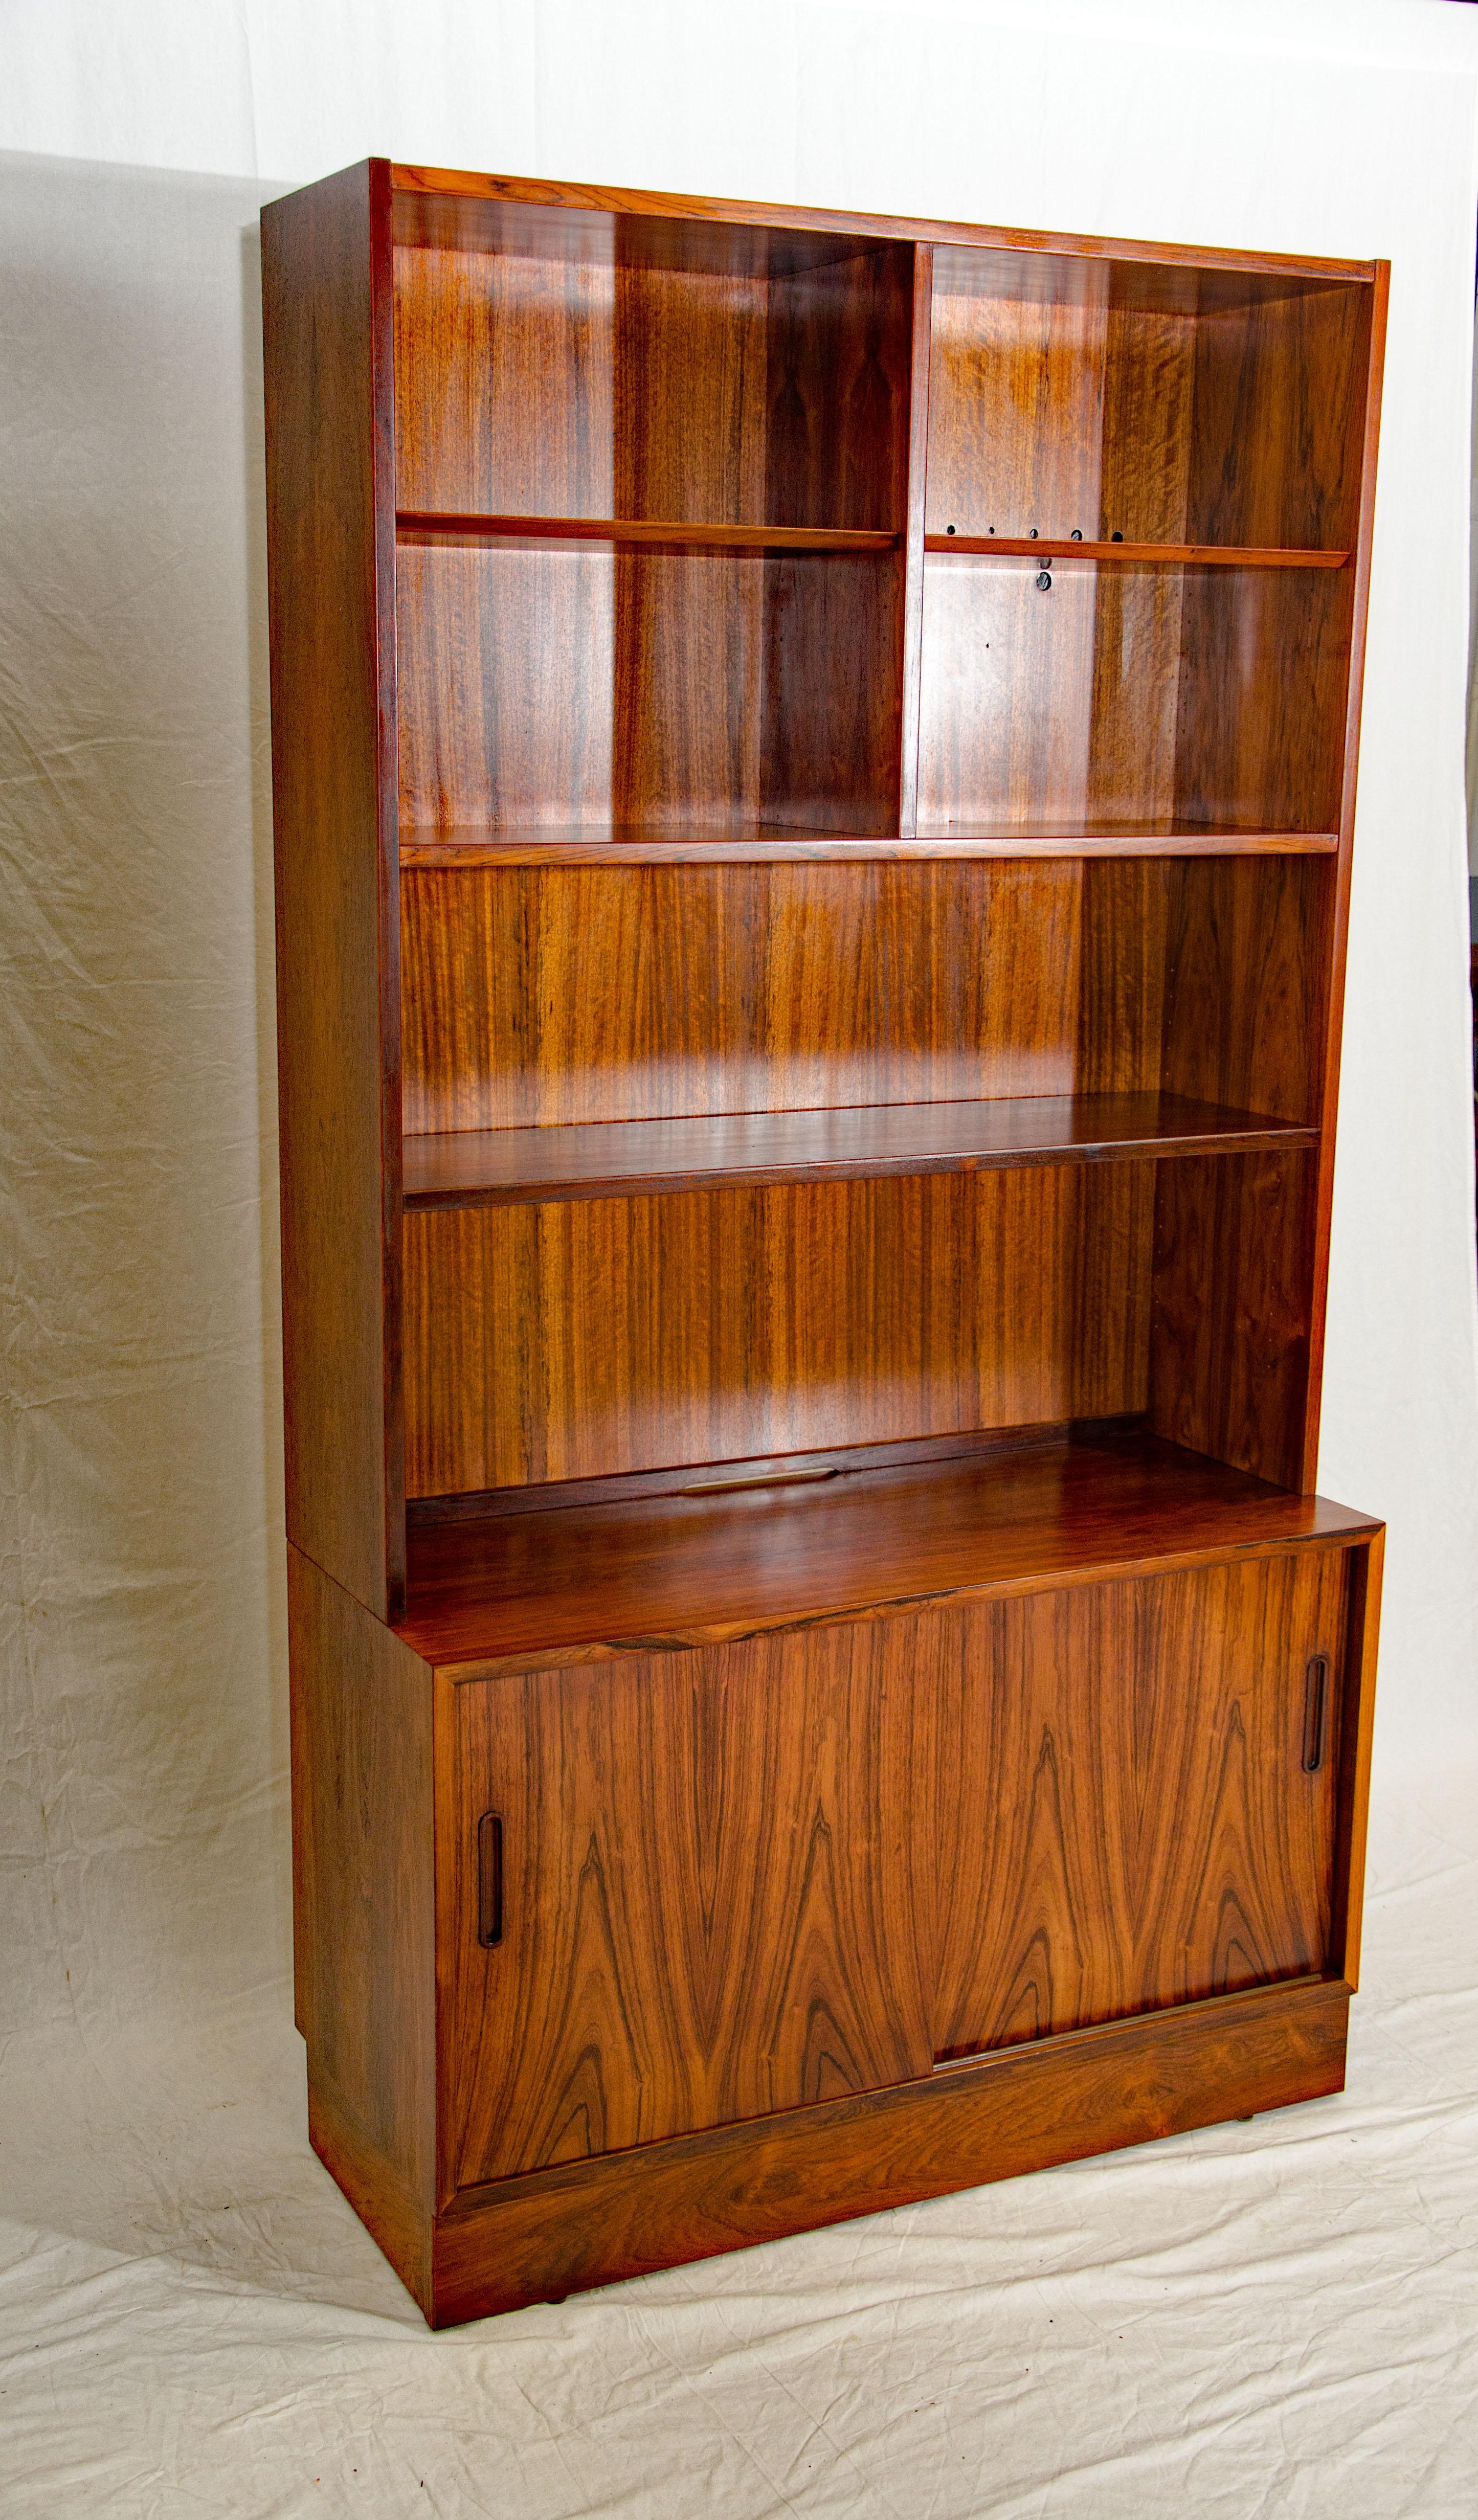 Nice medium size Danish rosewood bookcase shelf section on top of a cabinet with two sliding doors. The lower cabinet has small drawers on one side and an adjustable shelf on the other. The interior of the lower cabinet is birch. The lower cabinet